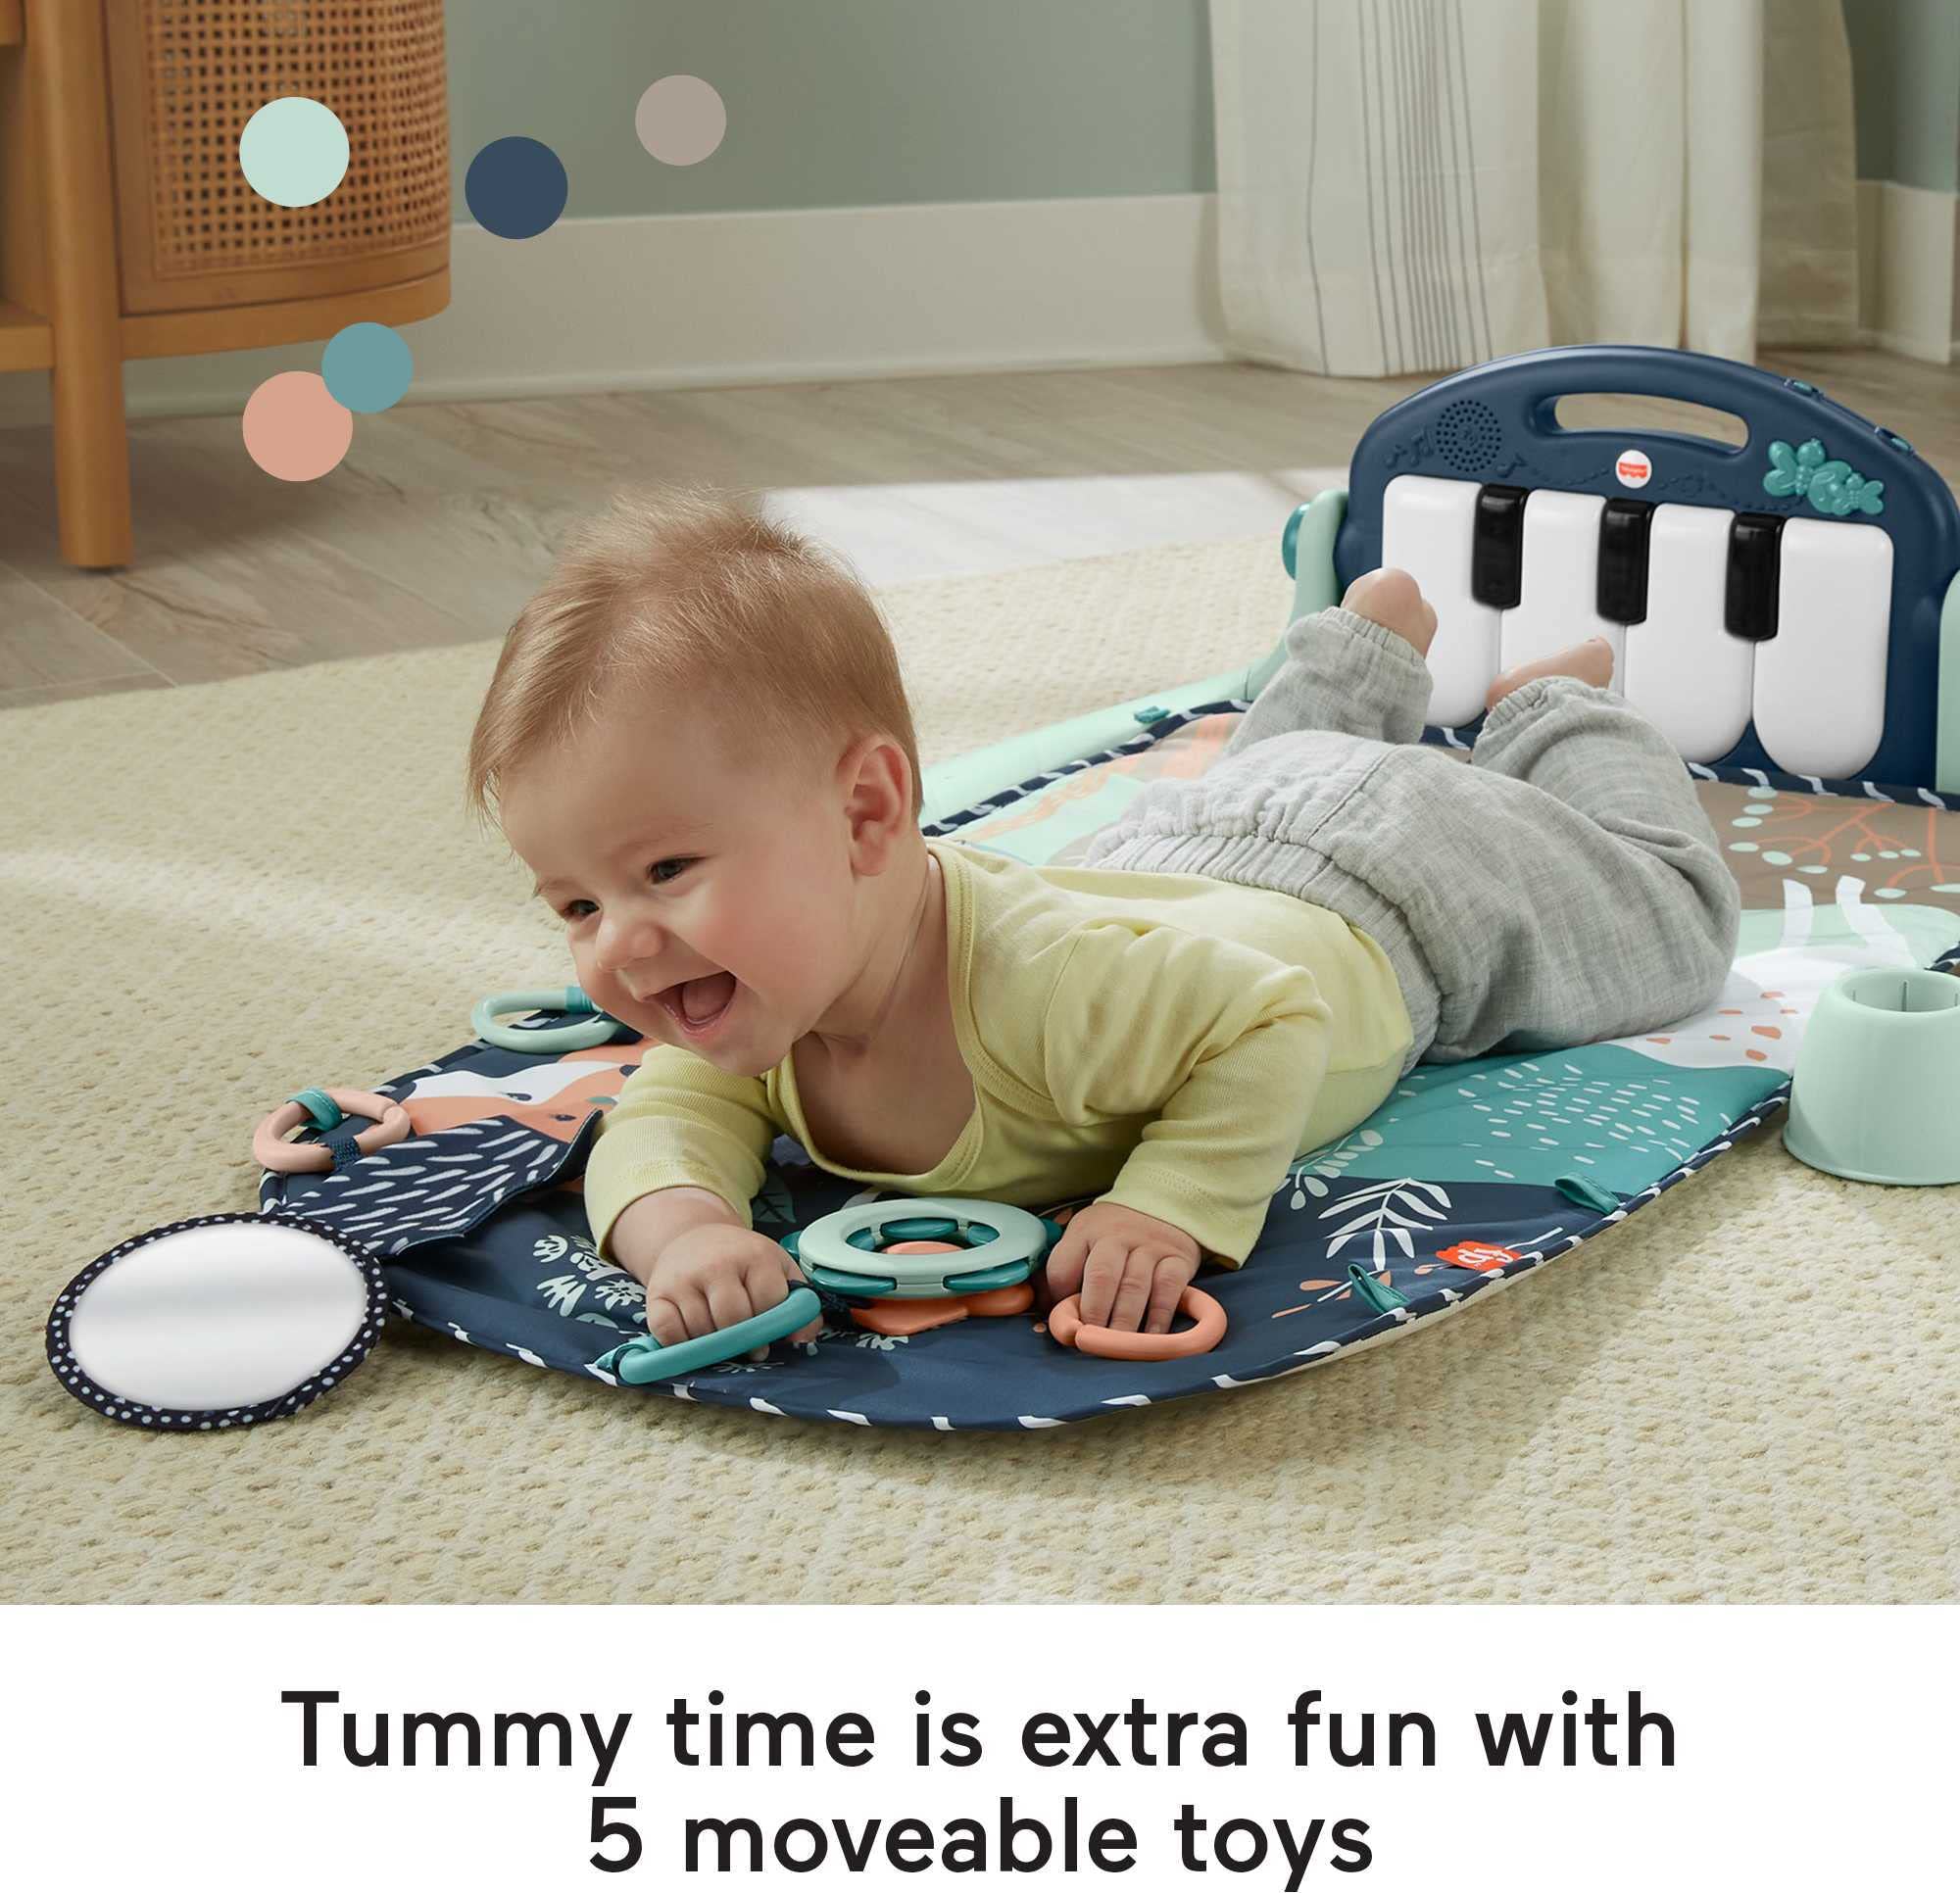 Fisher-Price Baby Playmat Kick & Play Piano Gym With Musical And Sensory Toys For Newborn To Toddler, Navy Fawn